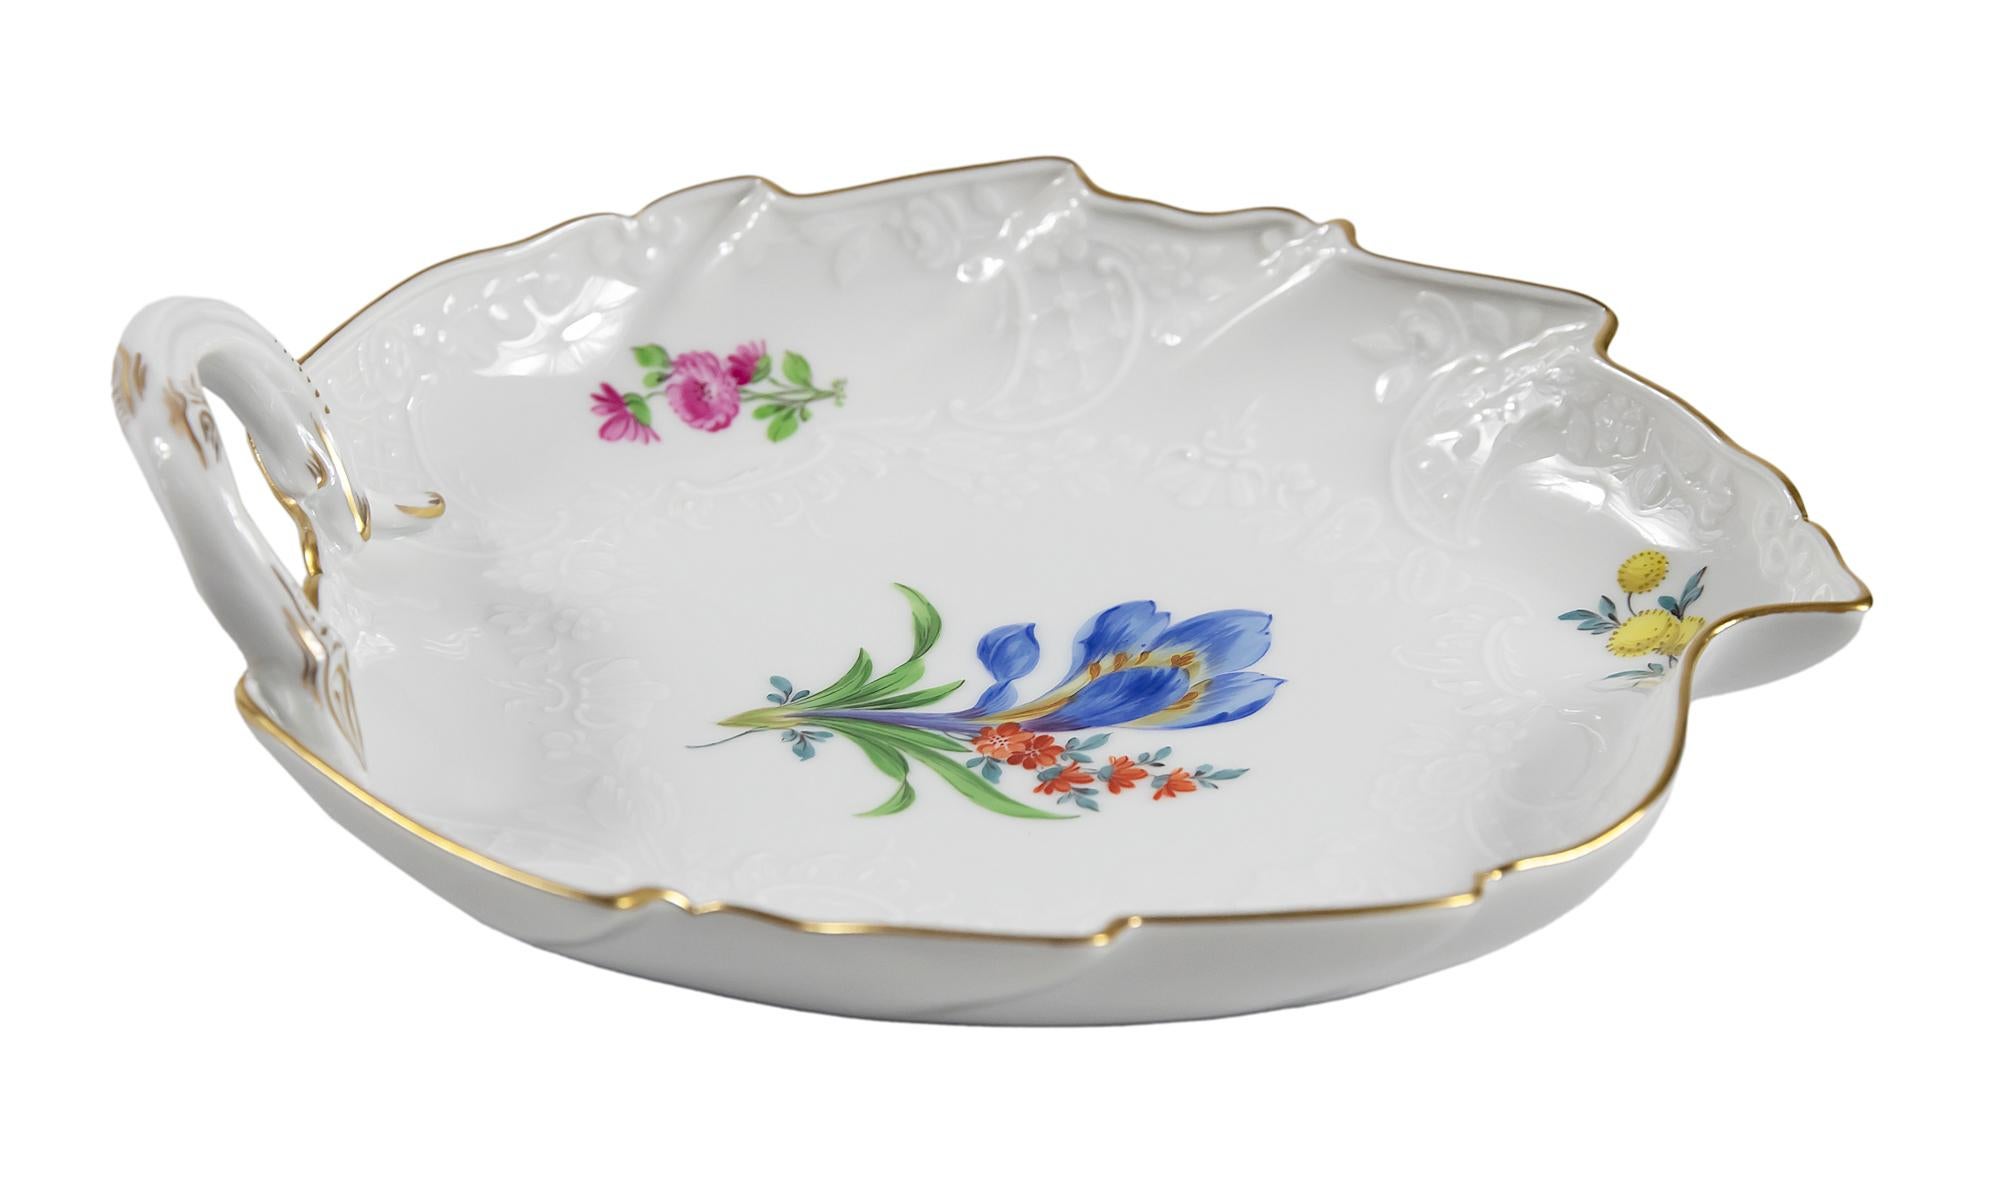 Meissen Porcelain leaf form plate with handle.
This piece is hand painted with floral motives and decorated with gold on edge and handle.
Signed on the bottom.